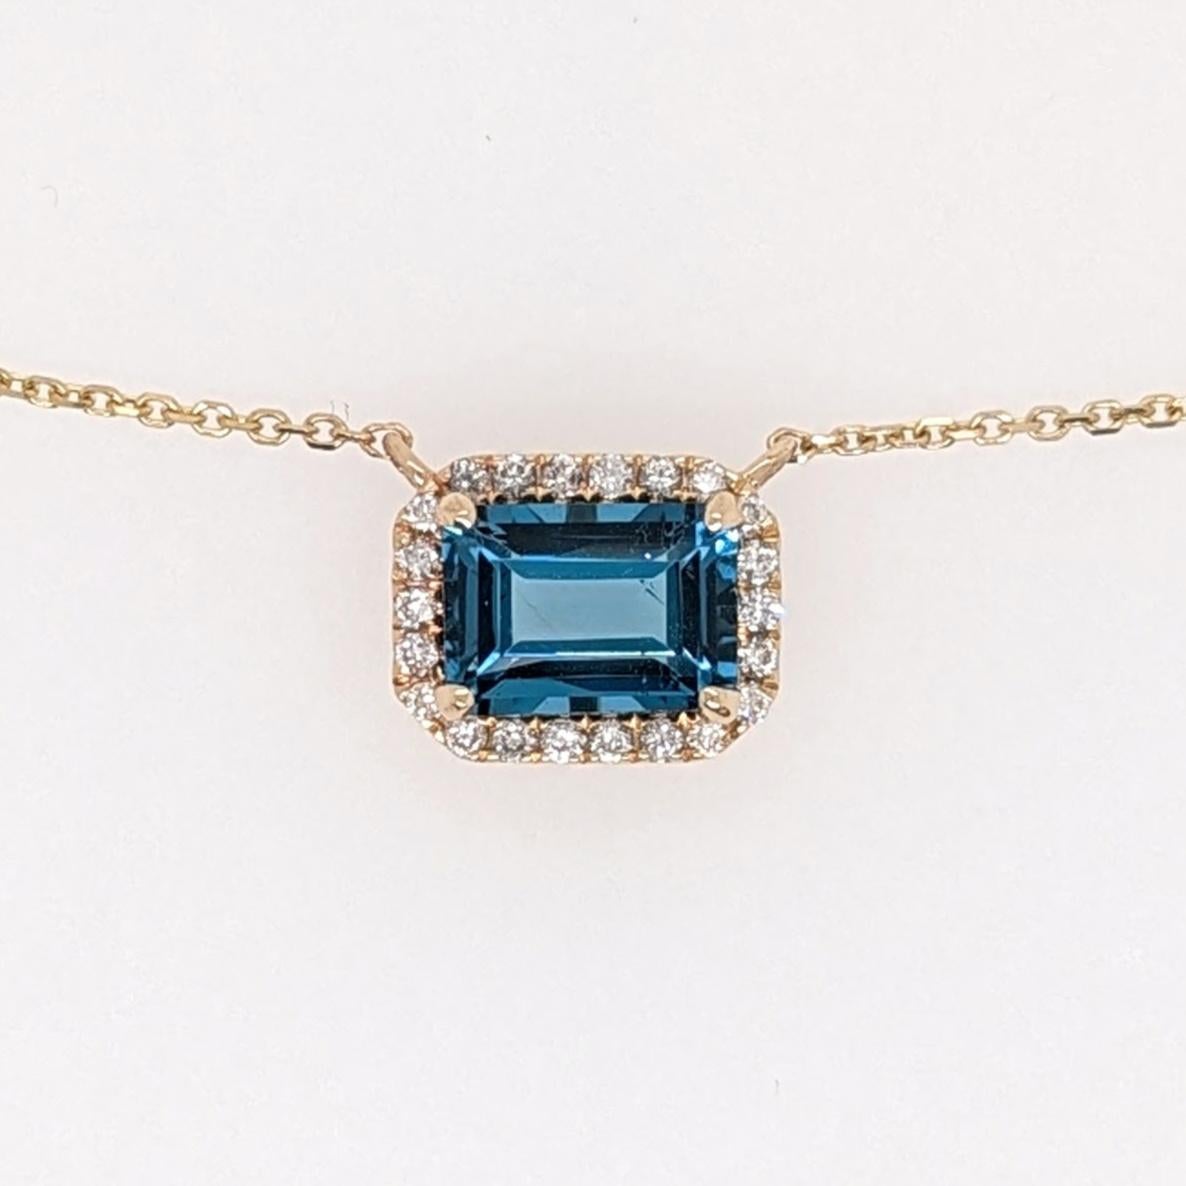 Topaz Necklace w Diamond Halo in Solid 14K Yellow Gold Emerald Cut 7x5mm